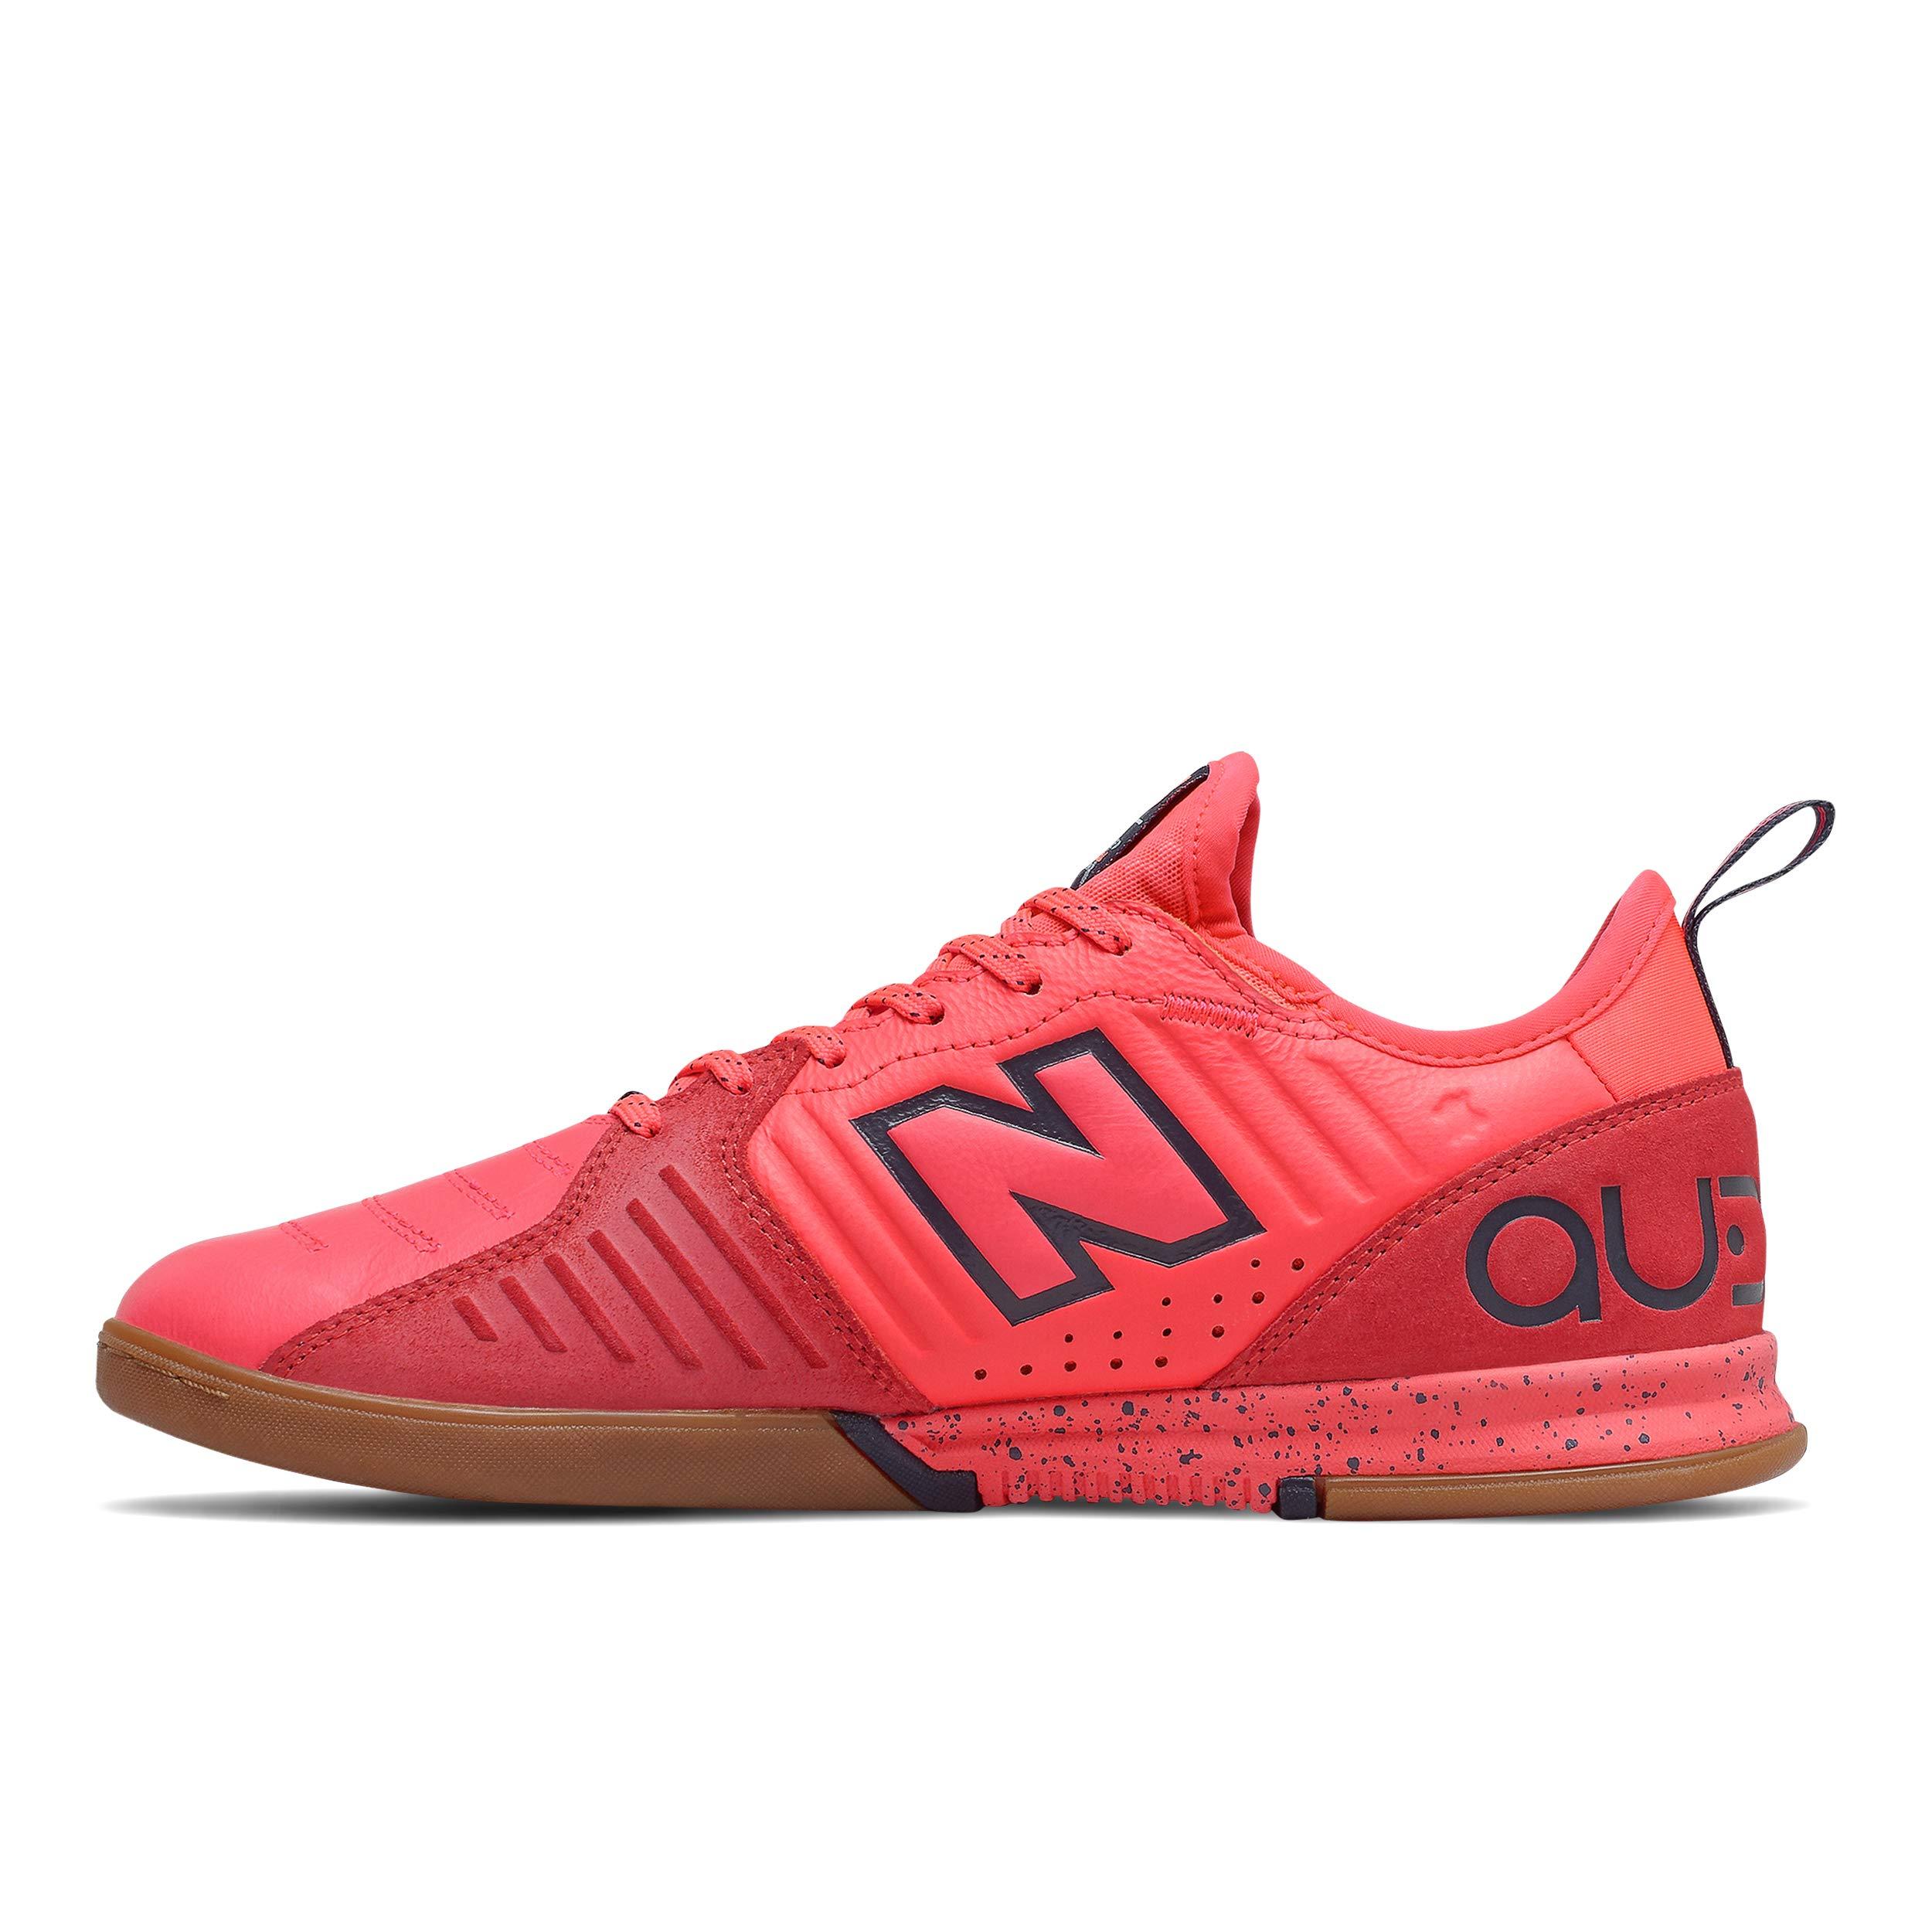 New Balance Leather Audazo Pro In V5 Soccer Shoe in Red for Men - Save 50%  | Lyst